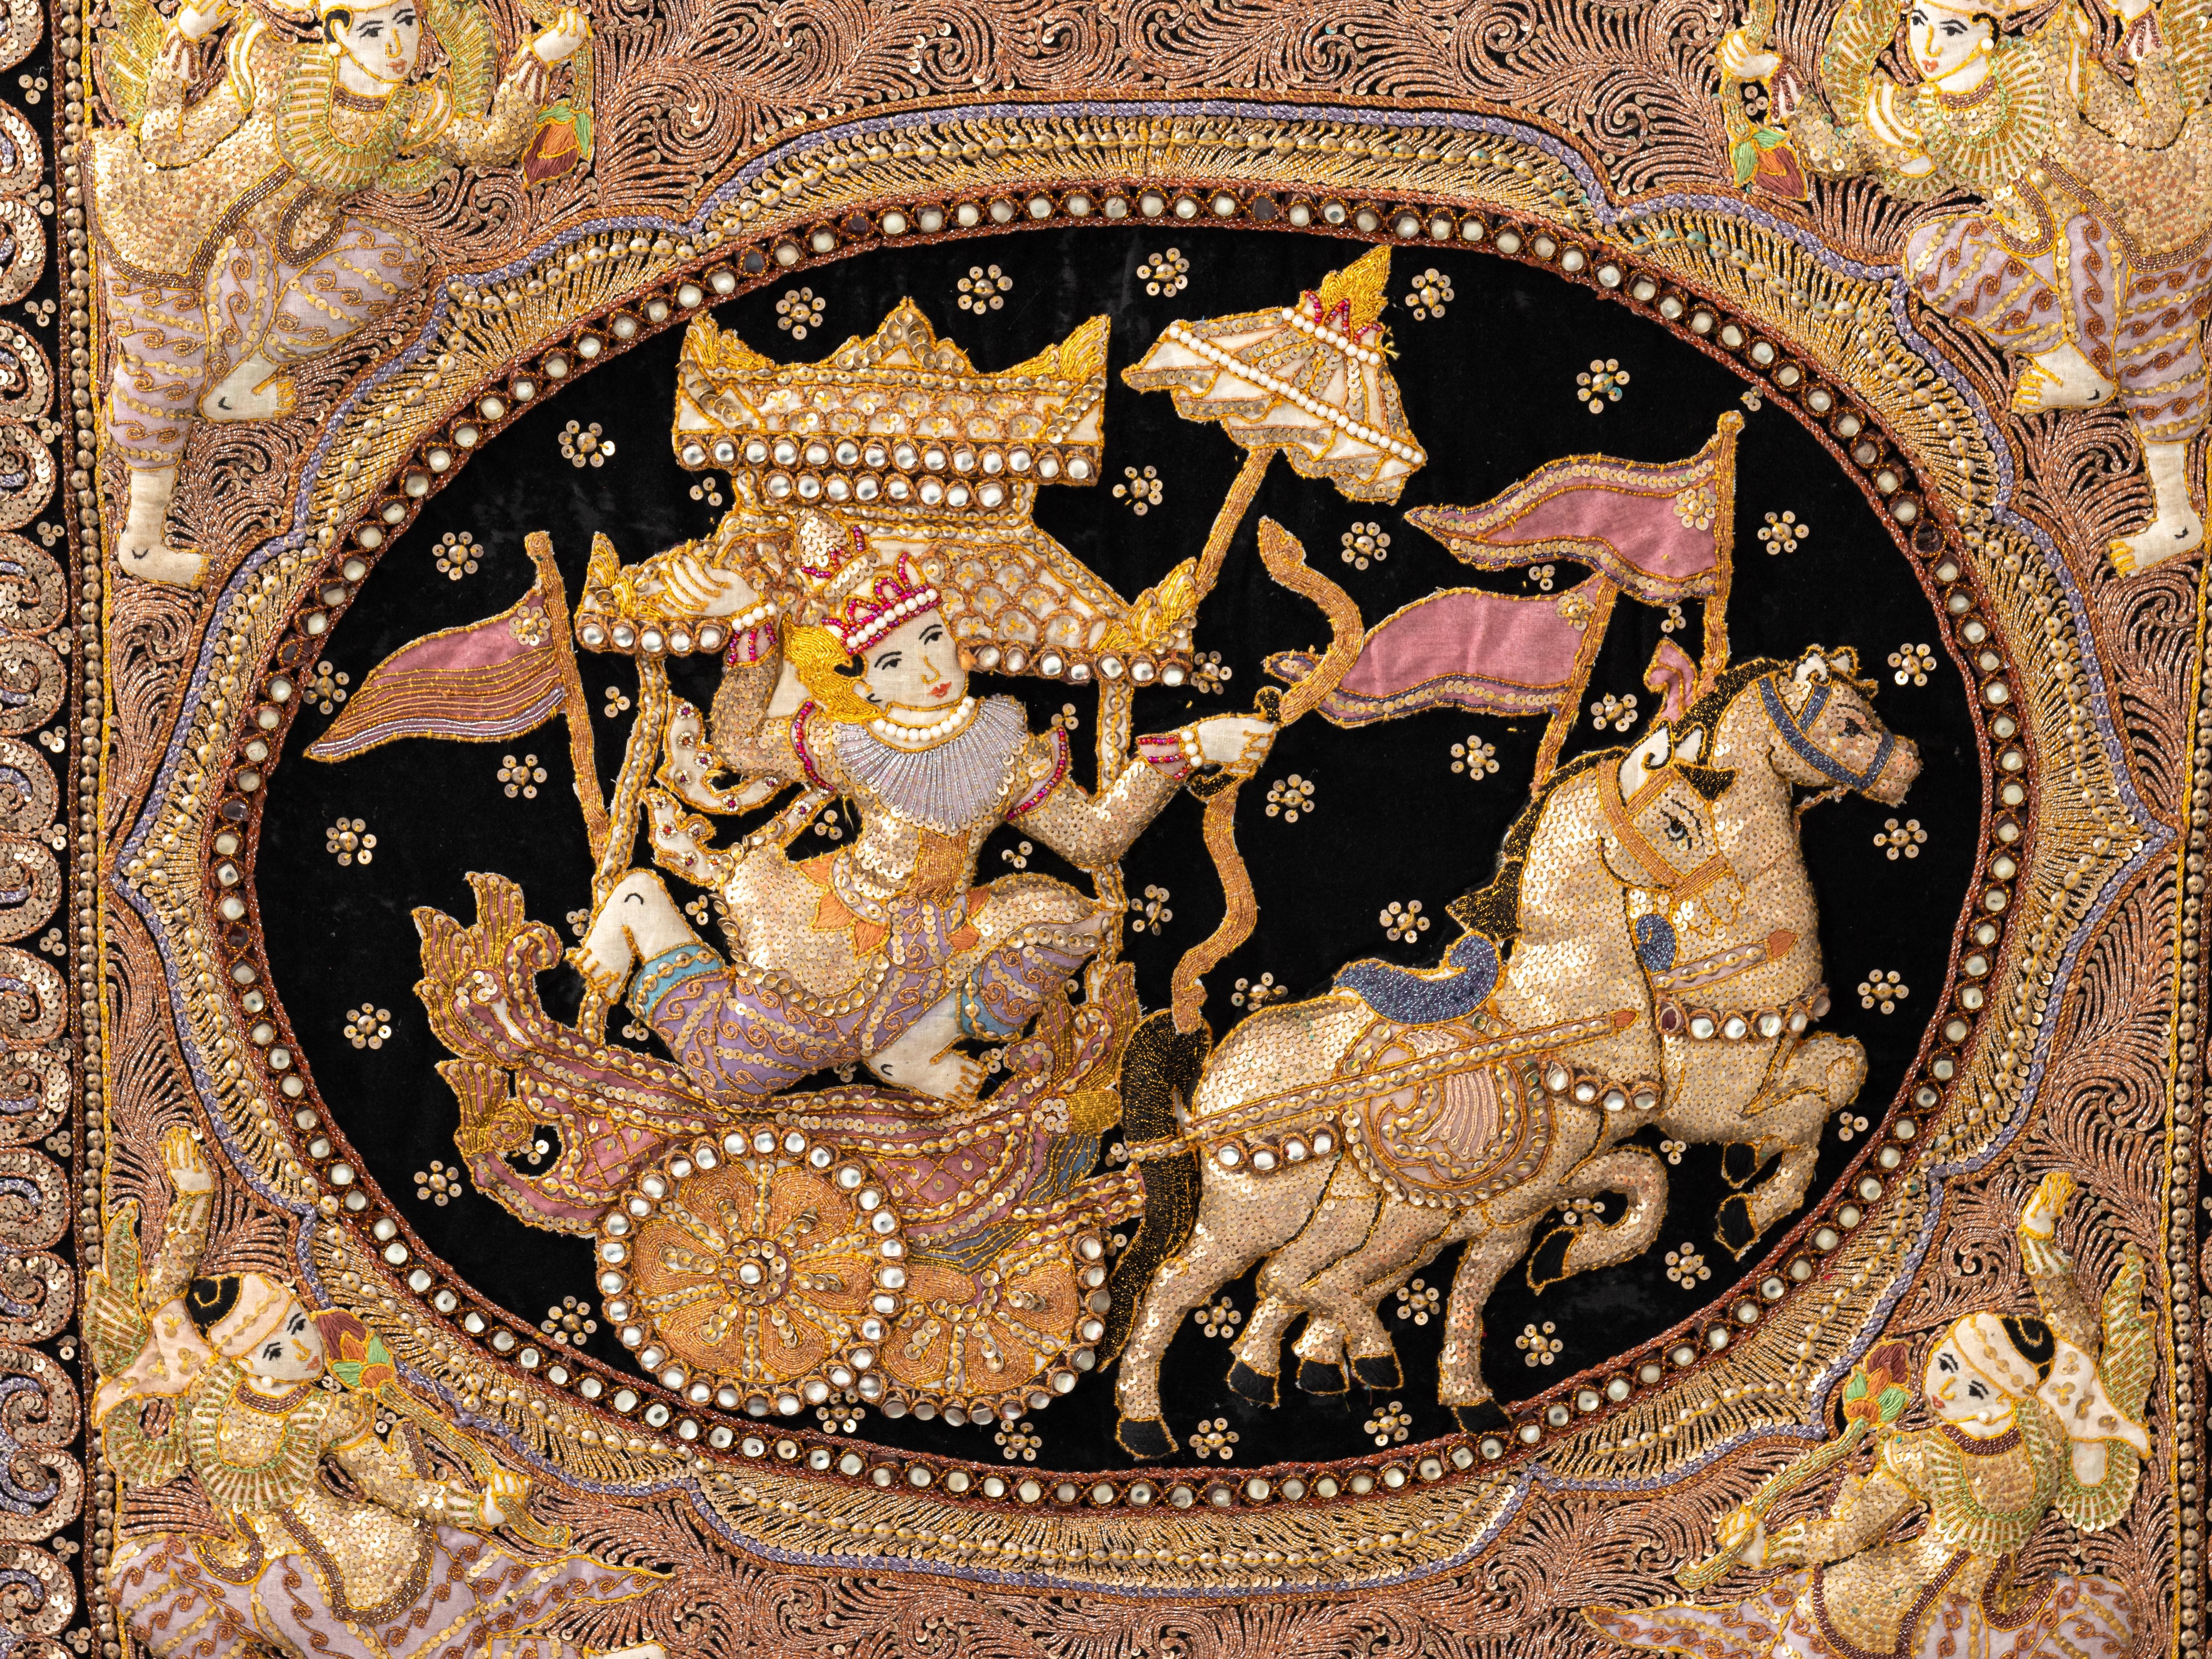 Circa 20th century embroidered Indian screen board with beaded detail. The piece also features an illustration of an Indian chariot rider with horses. Please note of wear consistent with age.